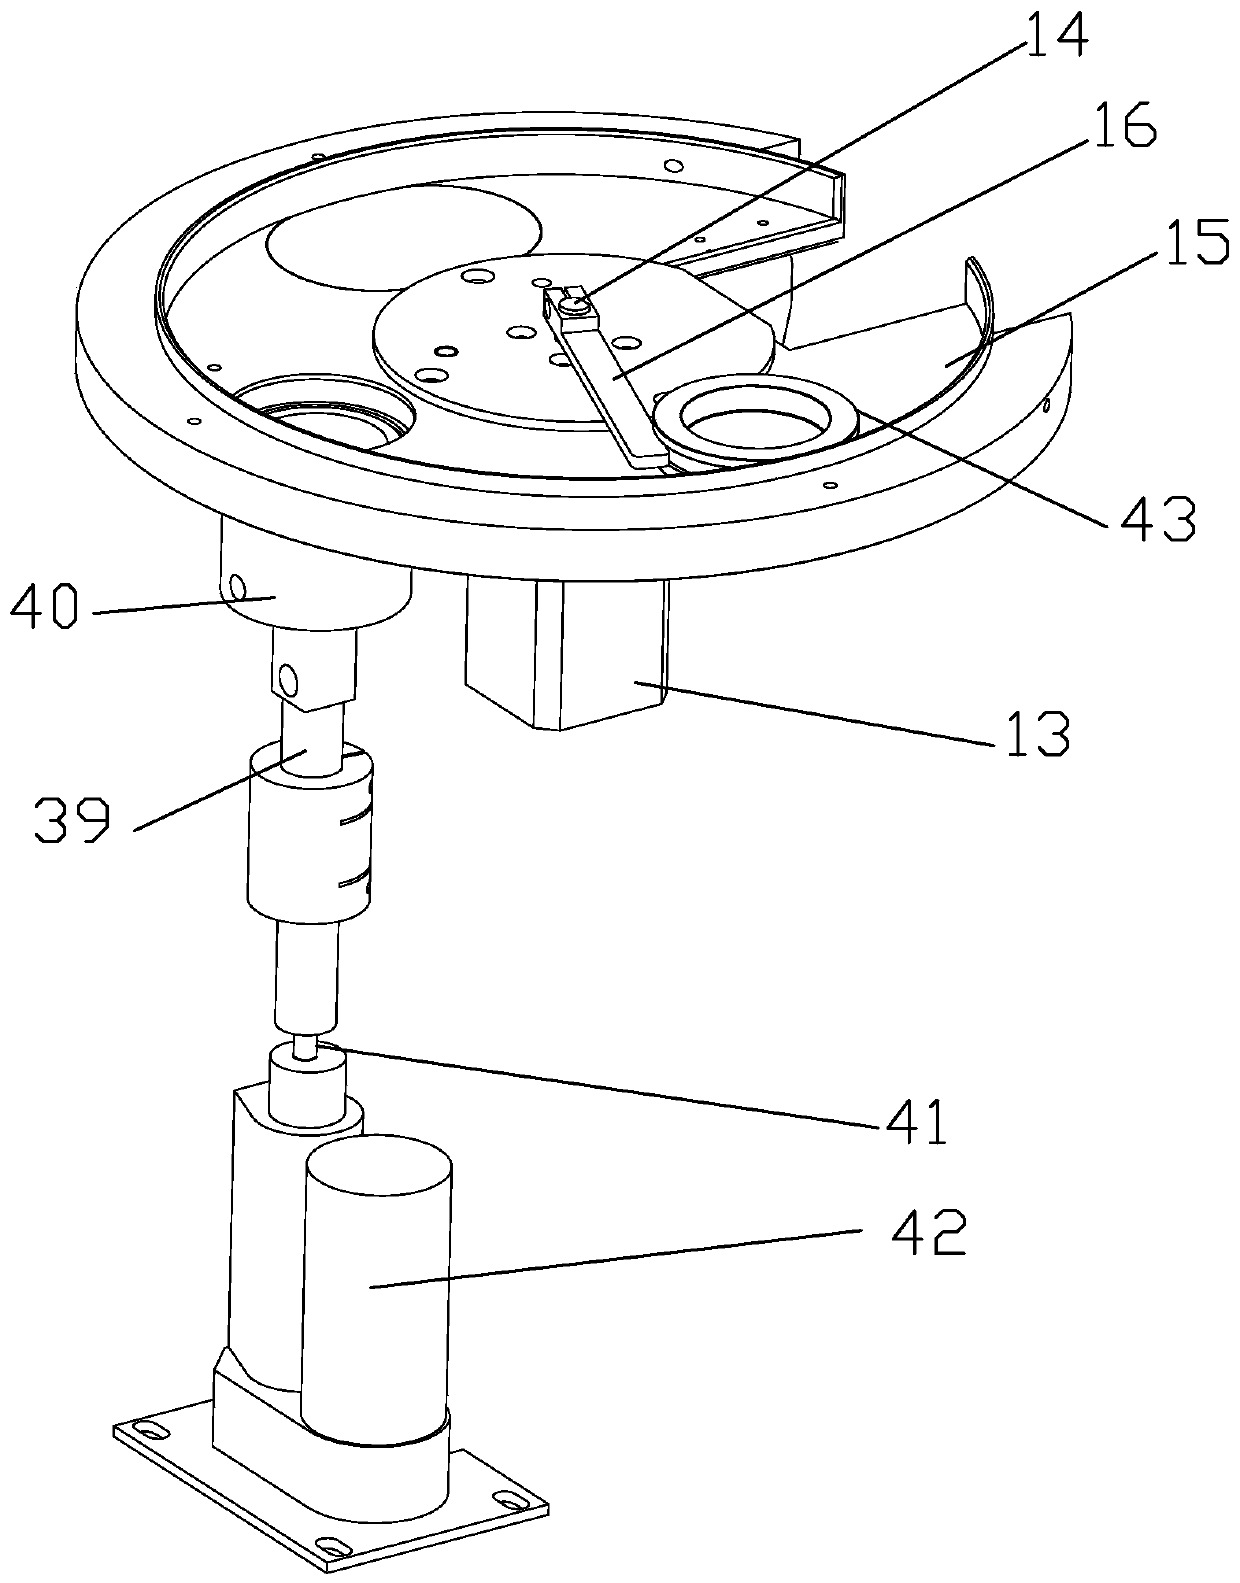 A multi-membrane sampling and weighing device